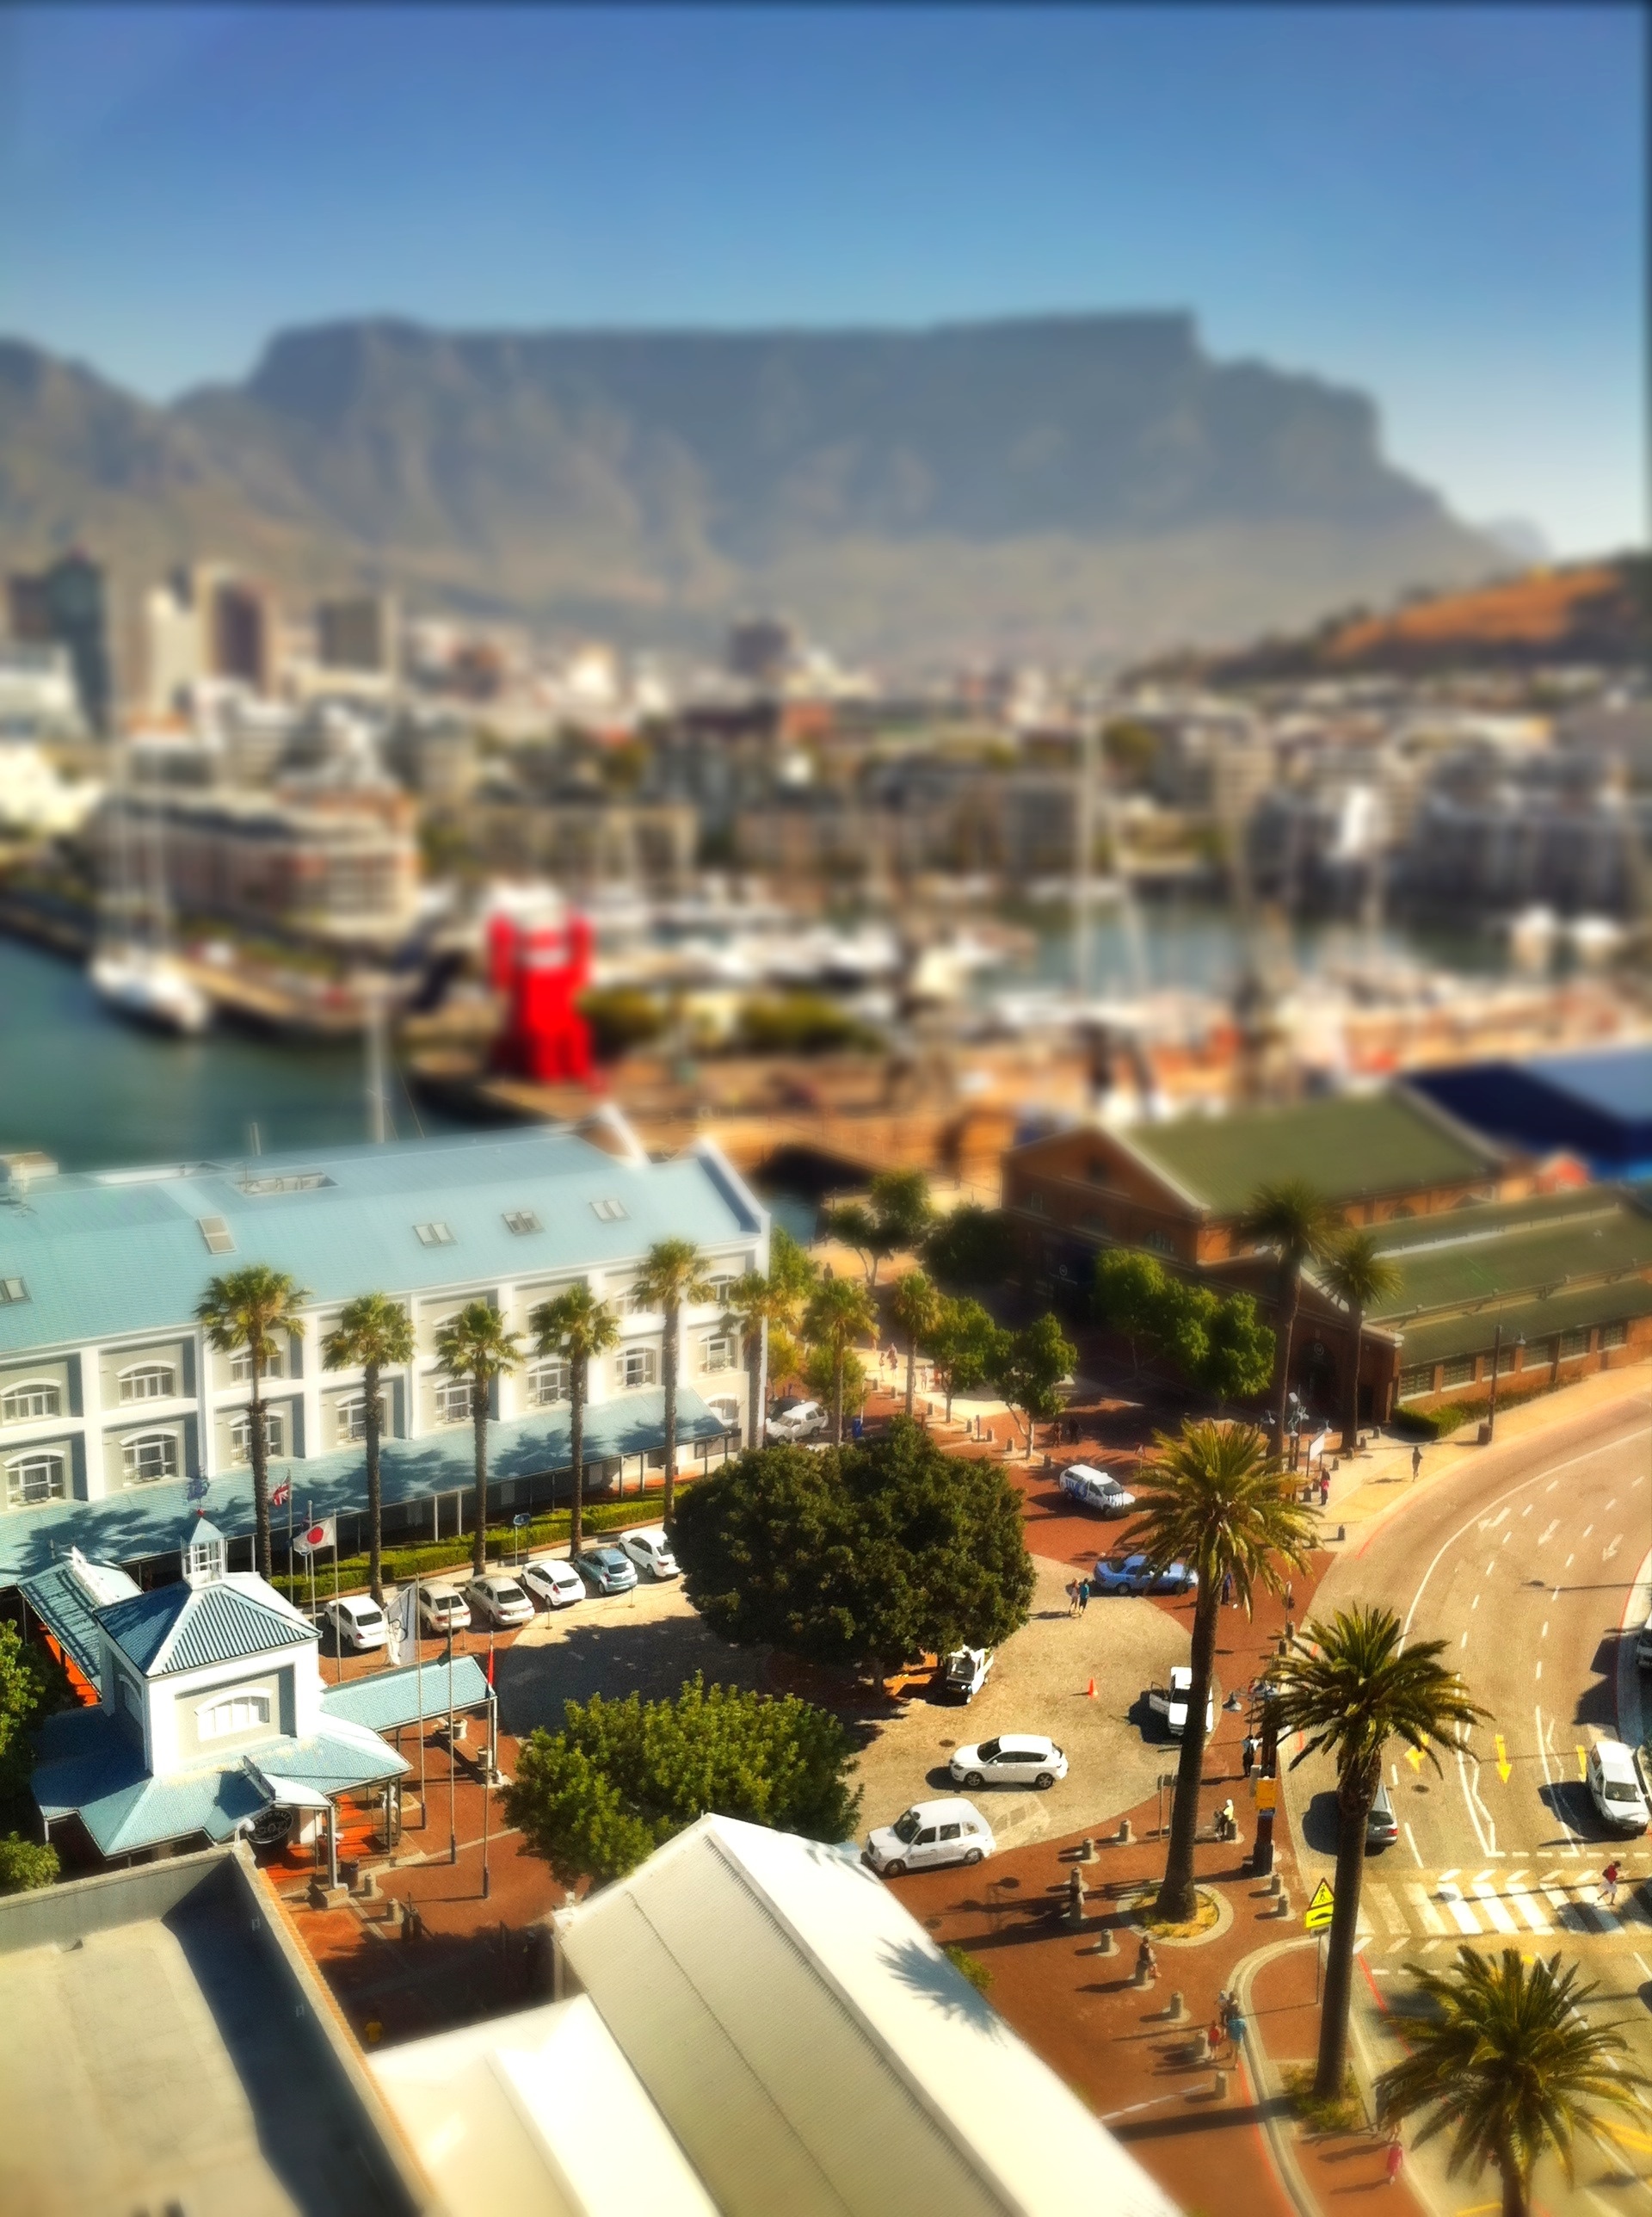 Day 110 – Mother City